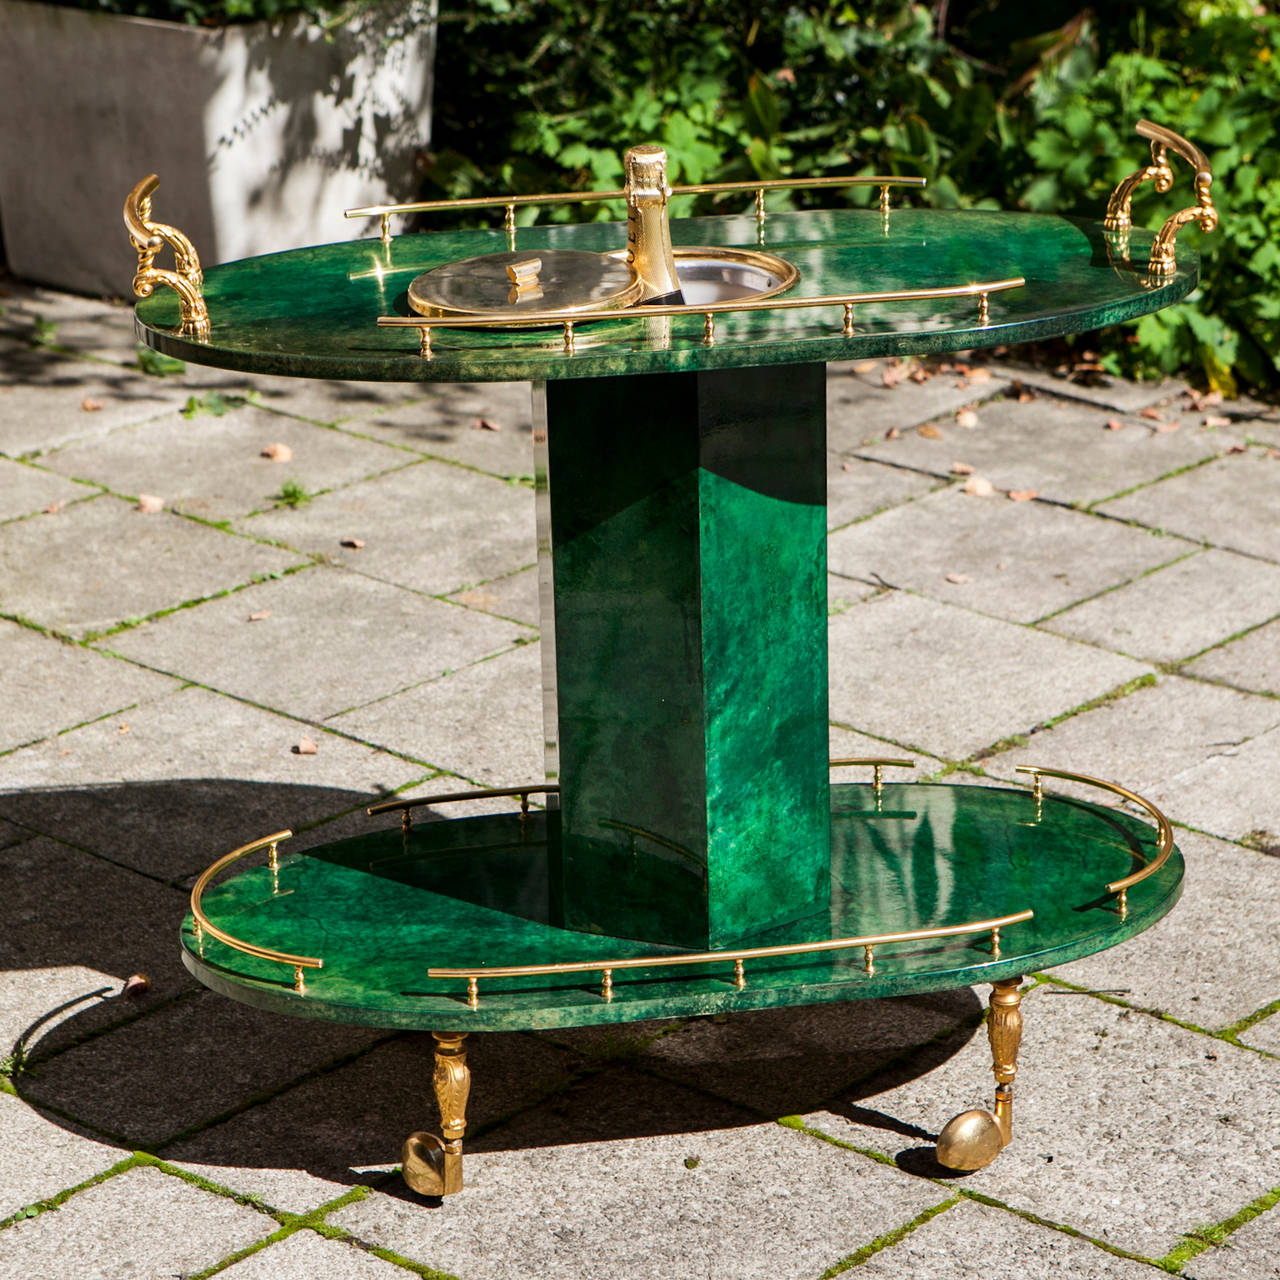 A bar cart by Aldo Tura, Milano, Italy in green lacquered goatskin with a cooler for champagne bottles, with brass details.